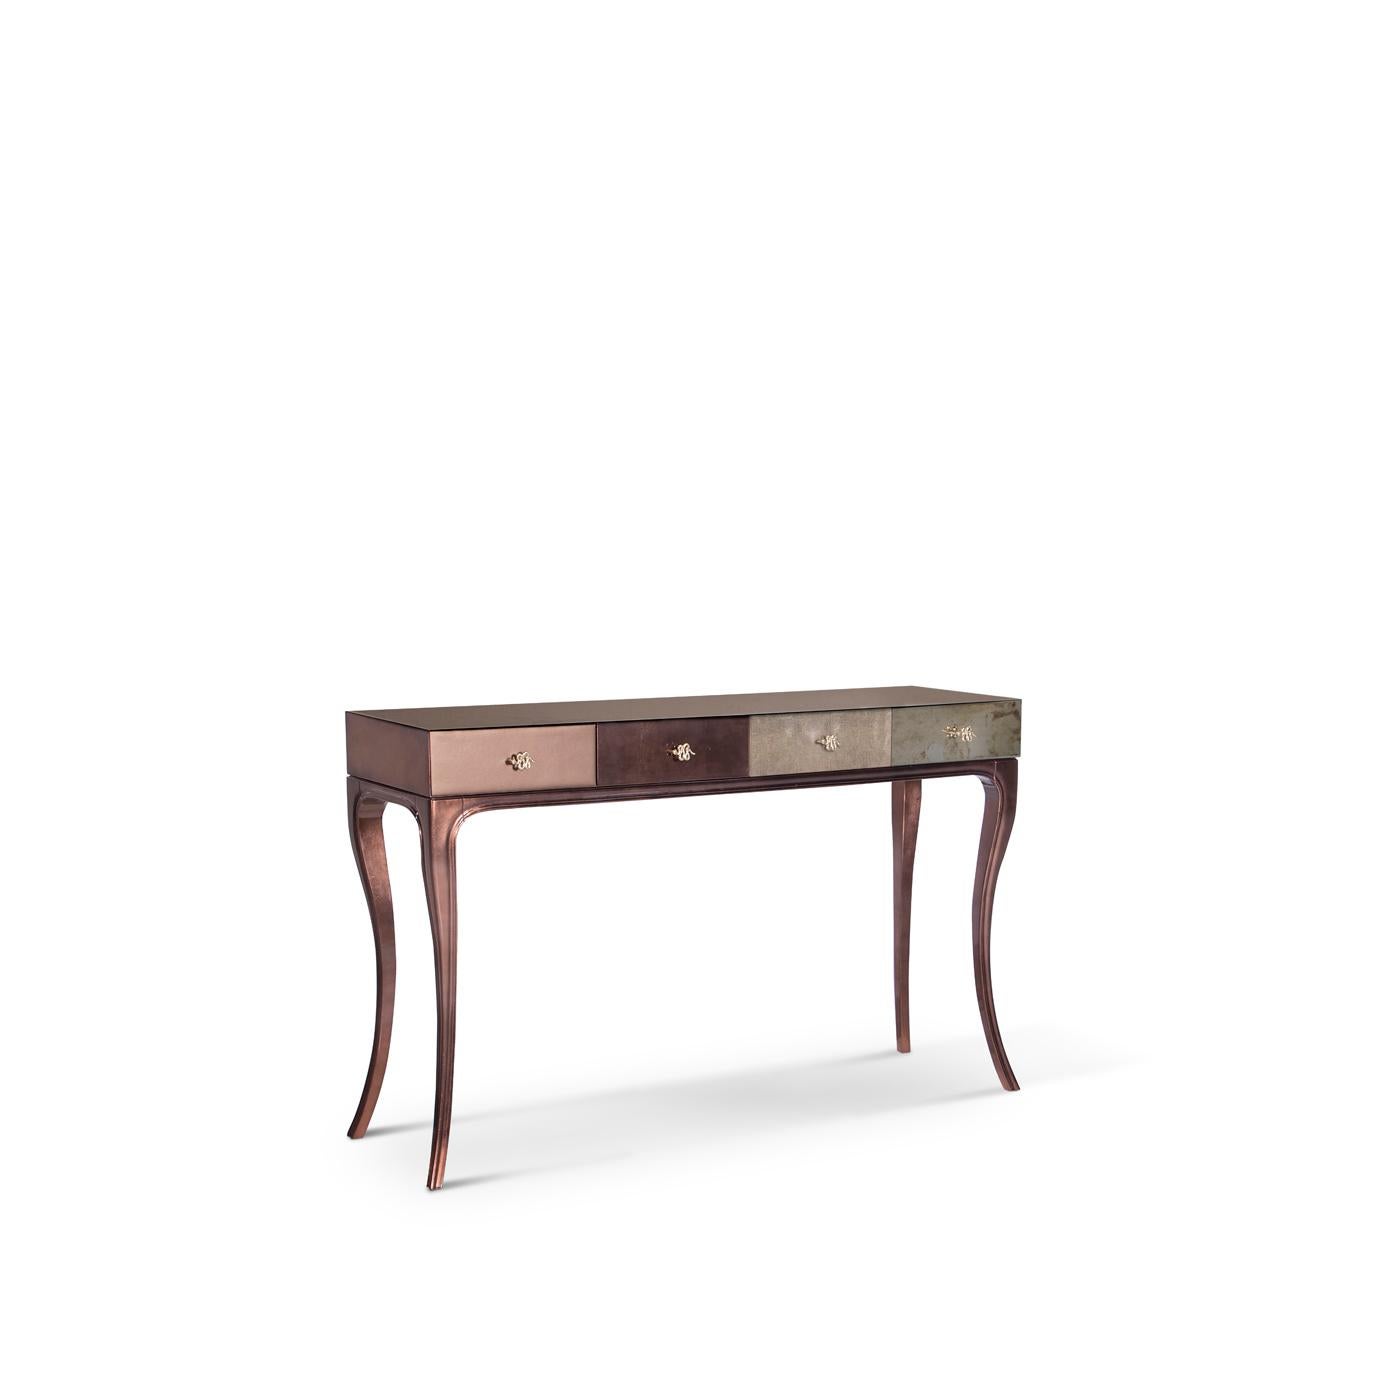 Fierce details packed with primal power, verve, and bite wrap this reptilian console. Drawer fronts are composed of various materials, finely refined by brass-coiled snake hardware.